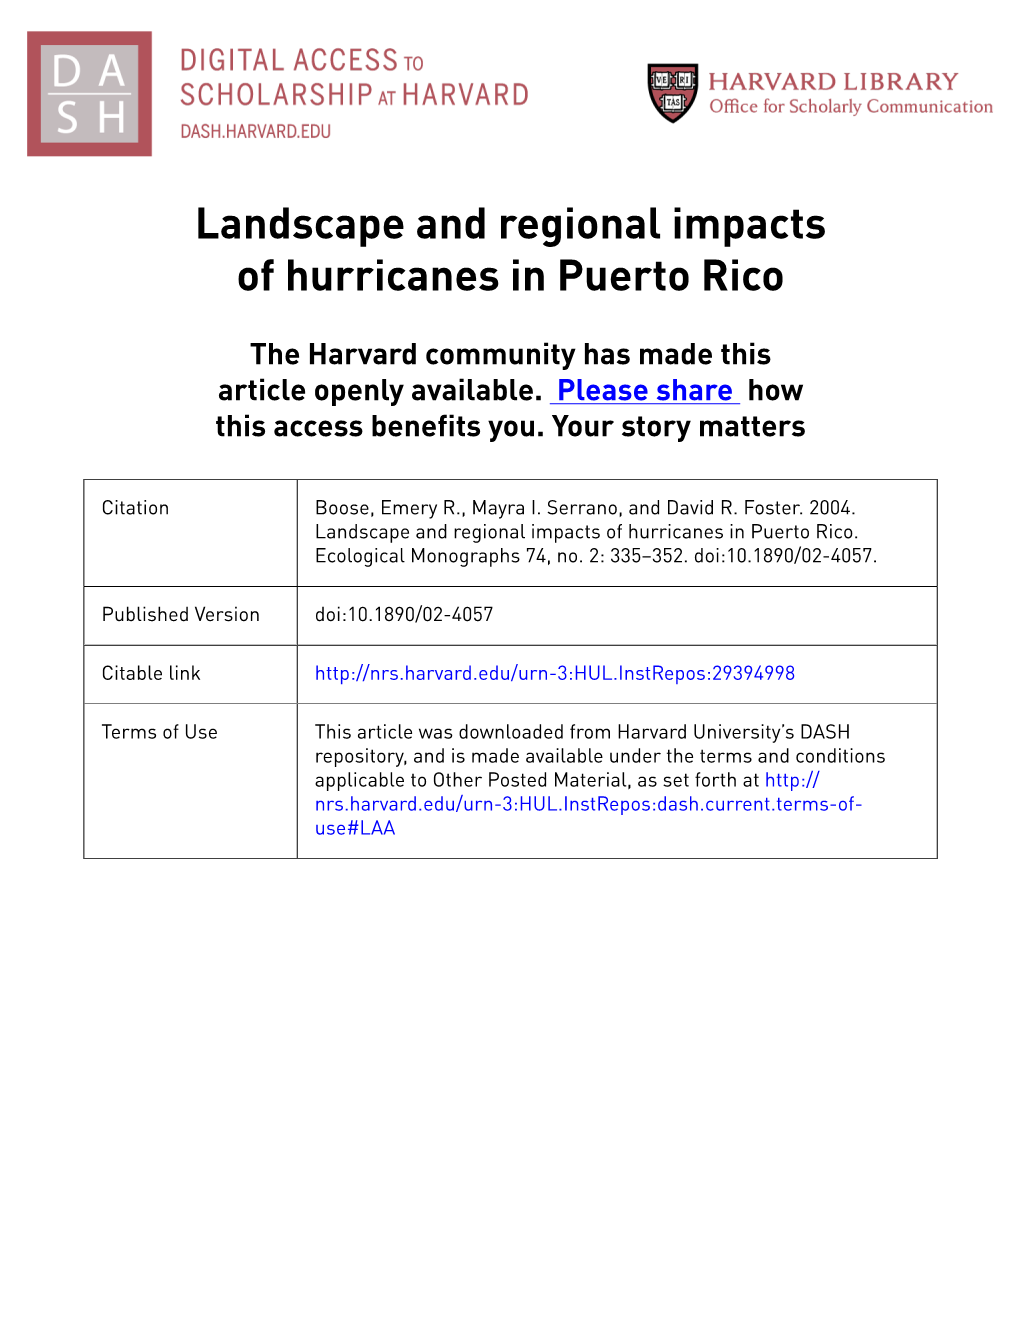 Landscape and Regional Impacts of Hurricanes in Puerto Rico